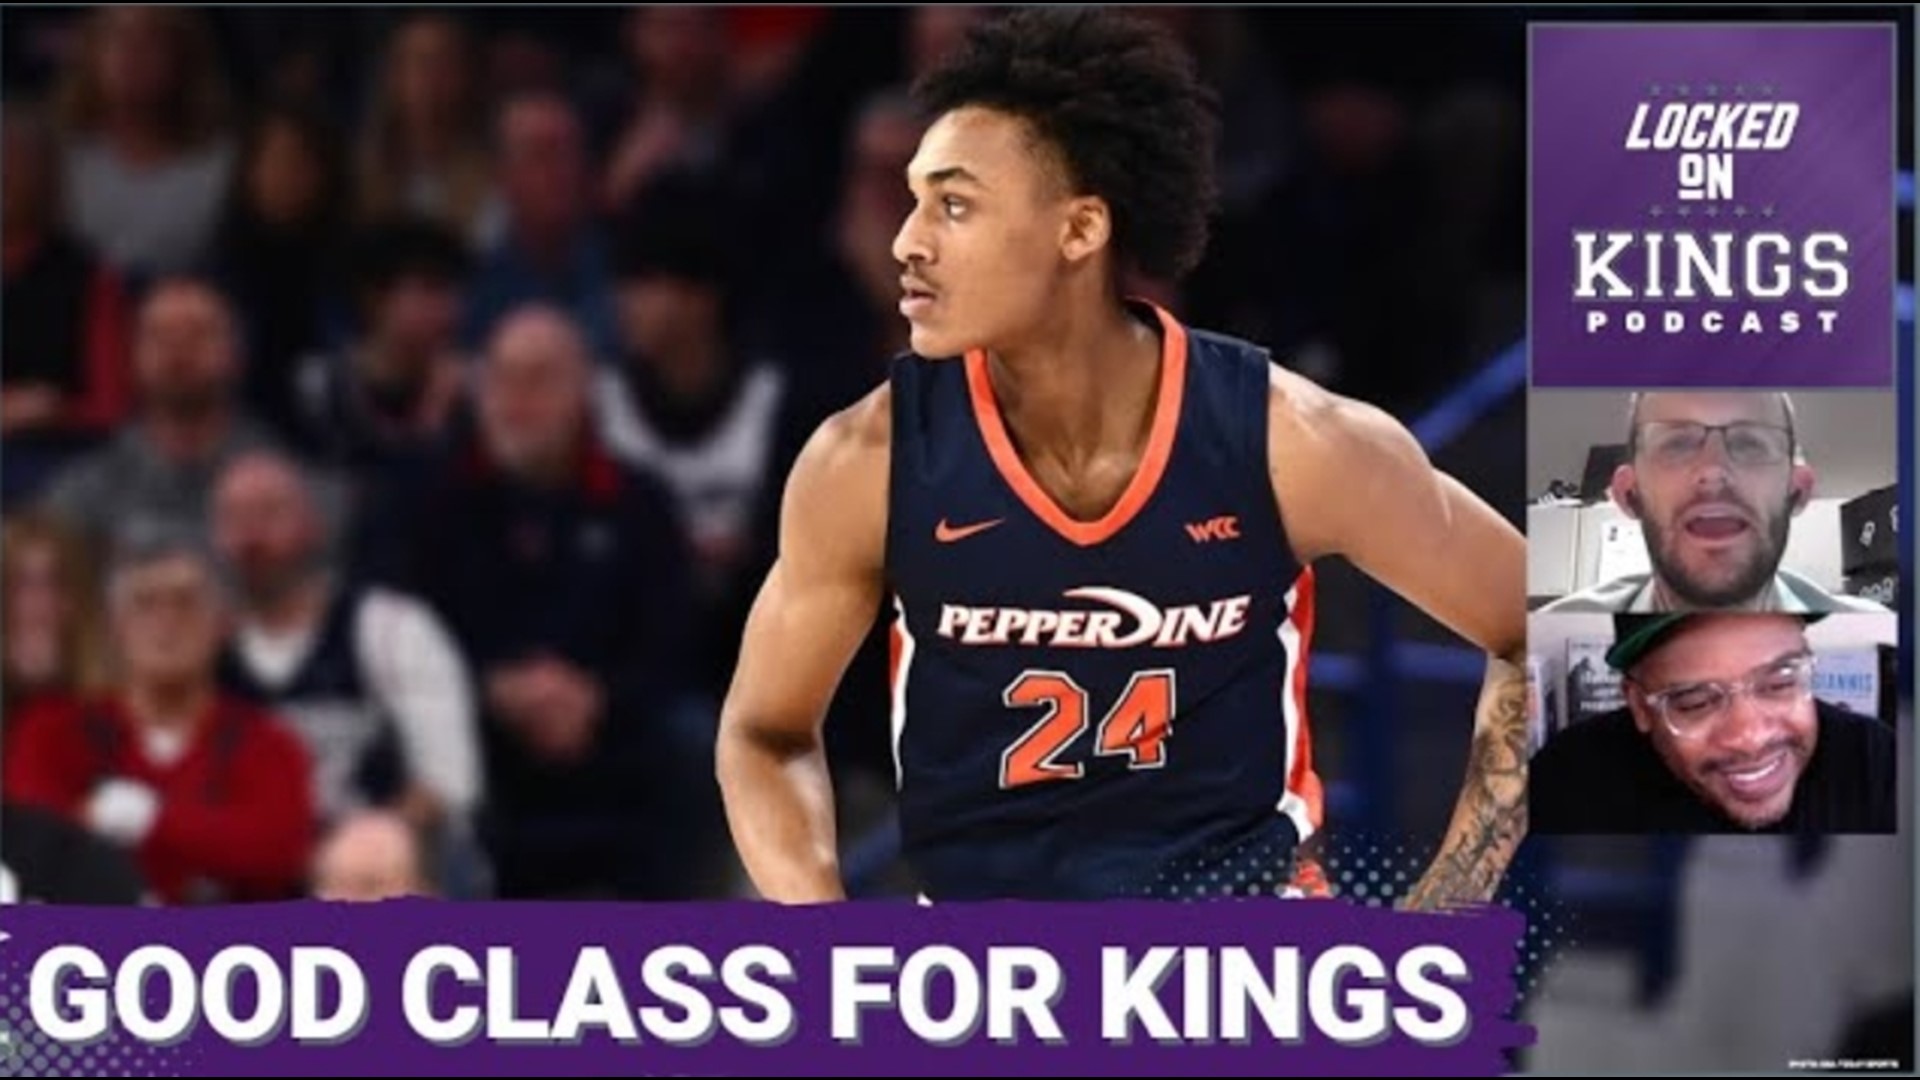 NBA Draft expert and Director of Scouting at NBA Big Board, Rafael Barlowe, discusses who the Kings to could take with the 24th pick.